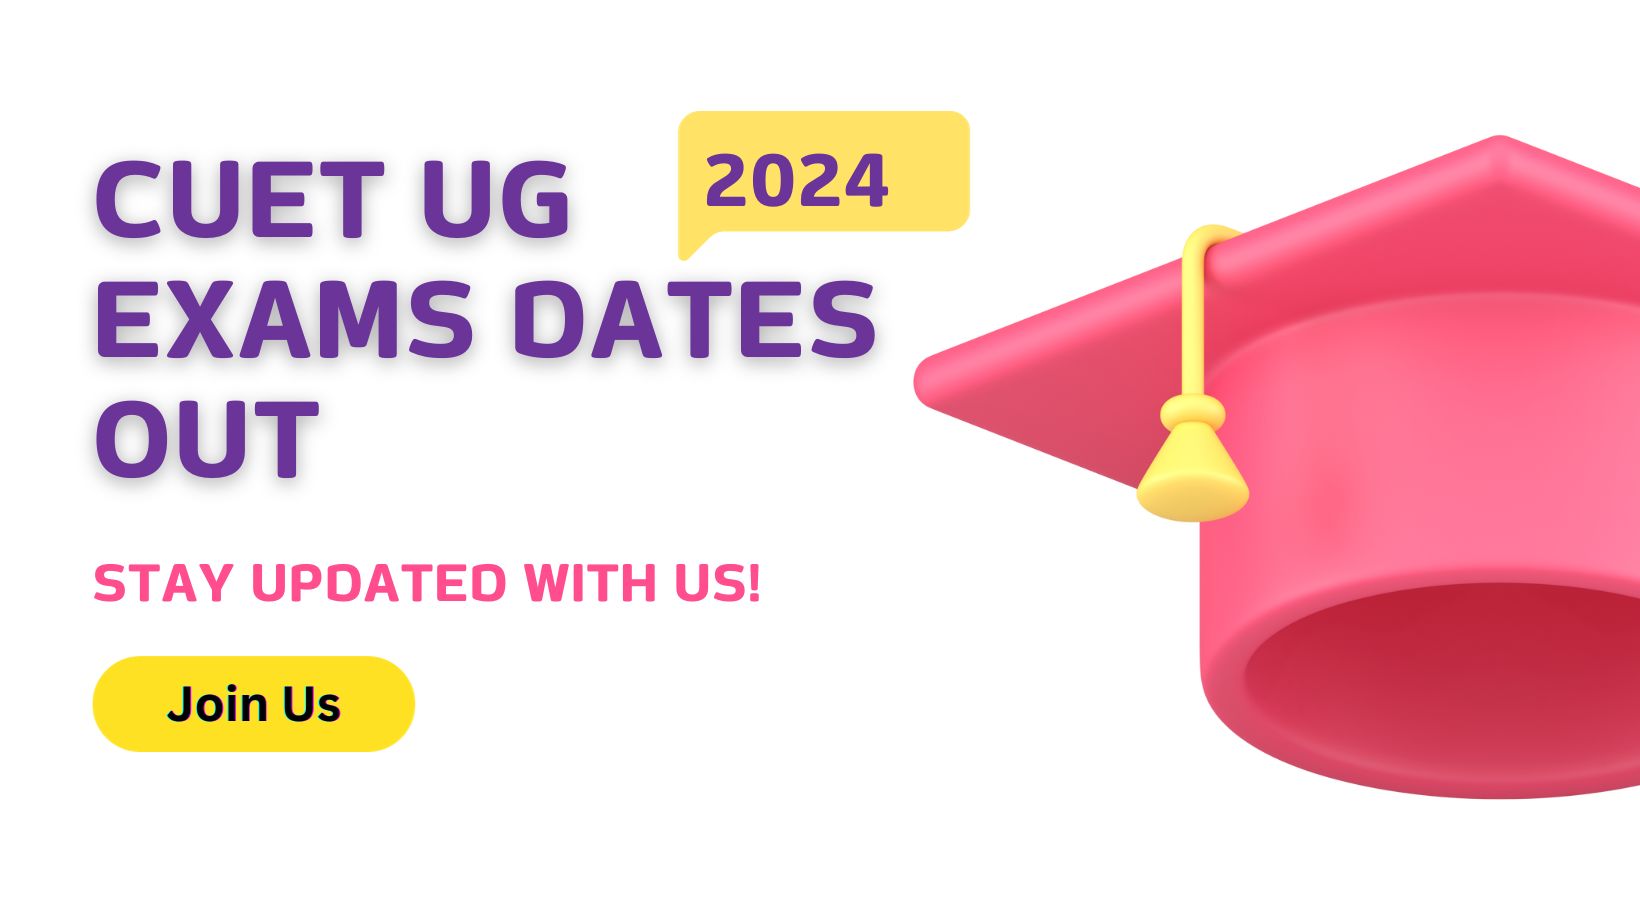 CUET UG 2024 exams dates are out CUET Coaching